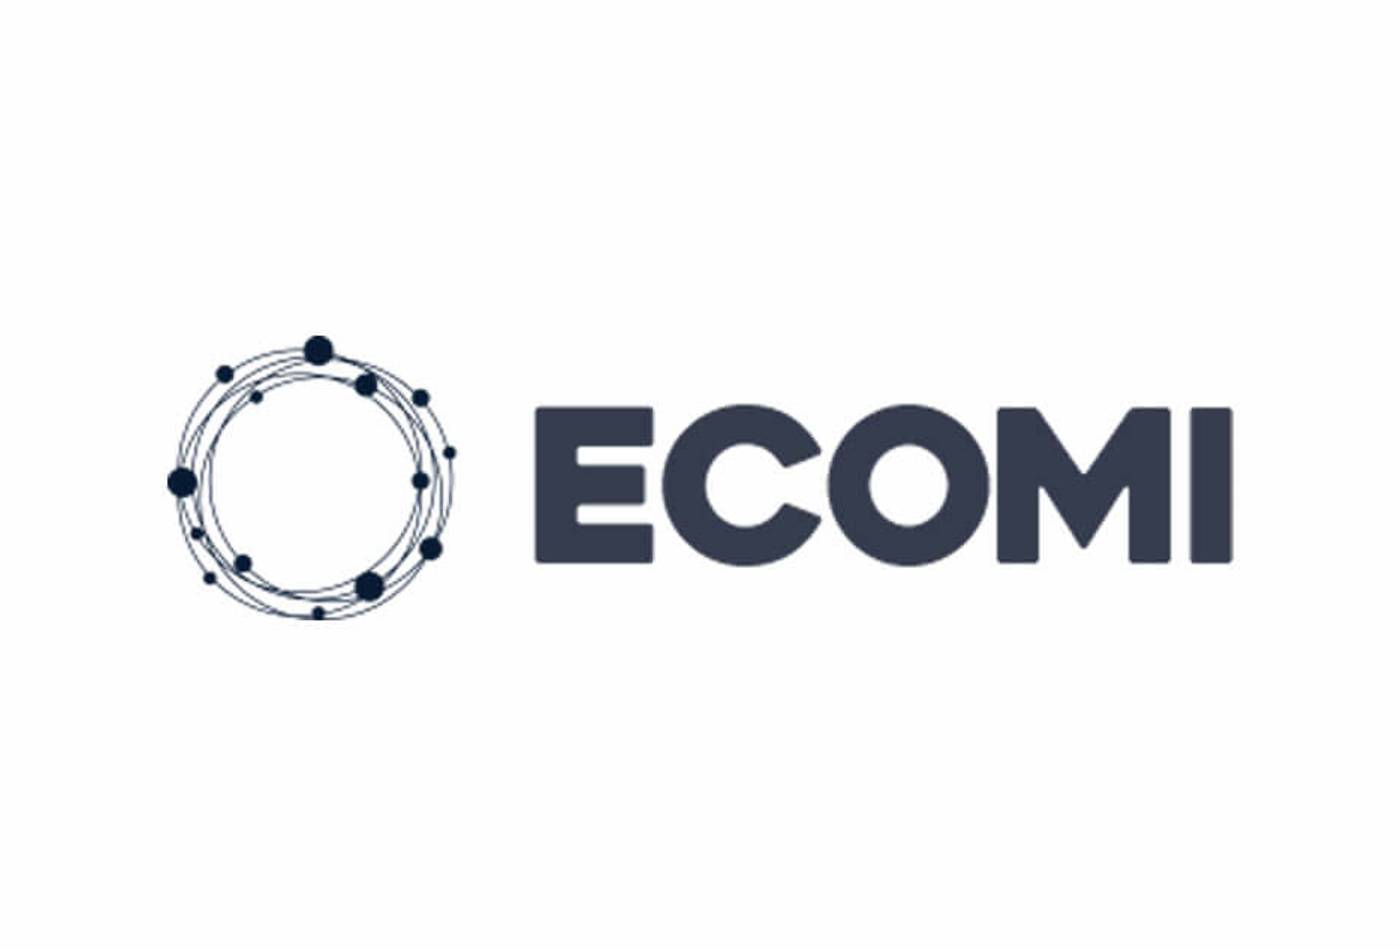 ECOMI (OMI) Price Prediction: The Best Forecast For 2022-2030